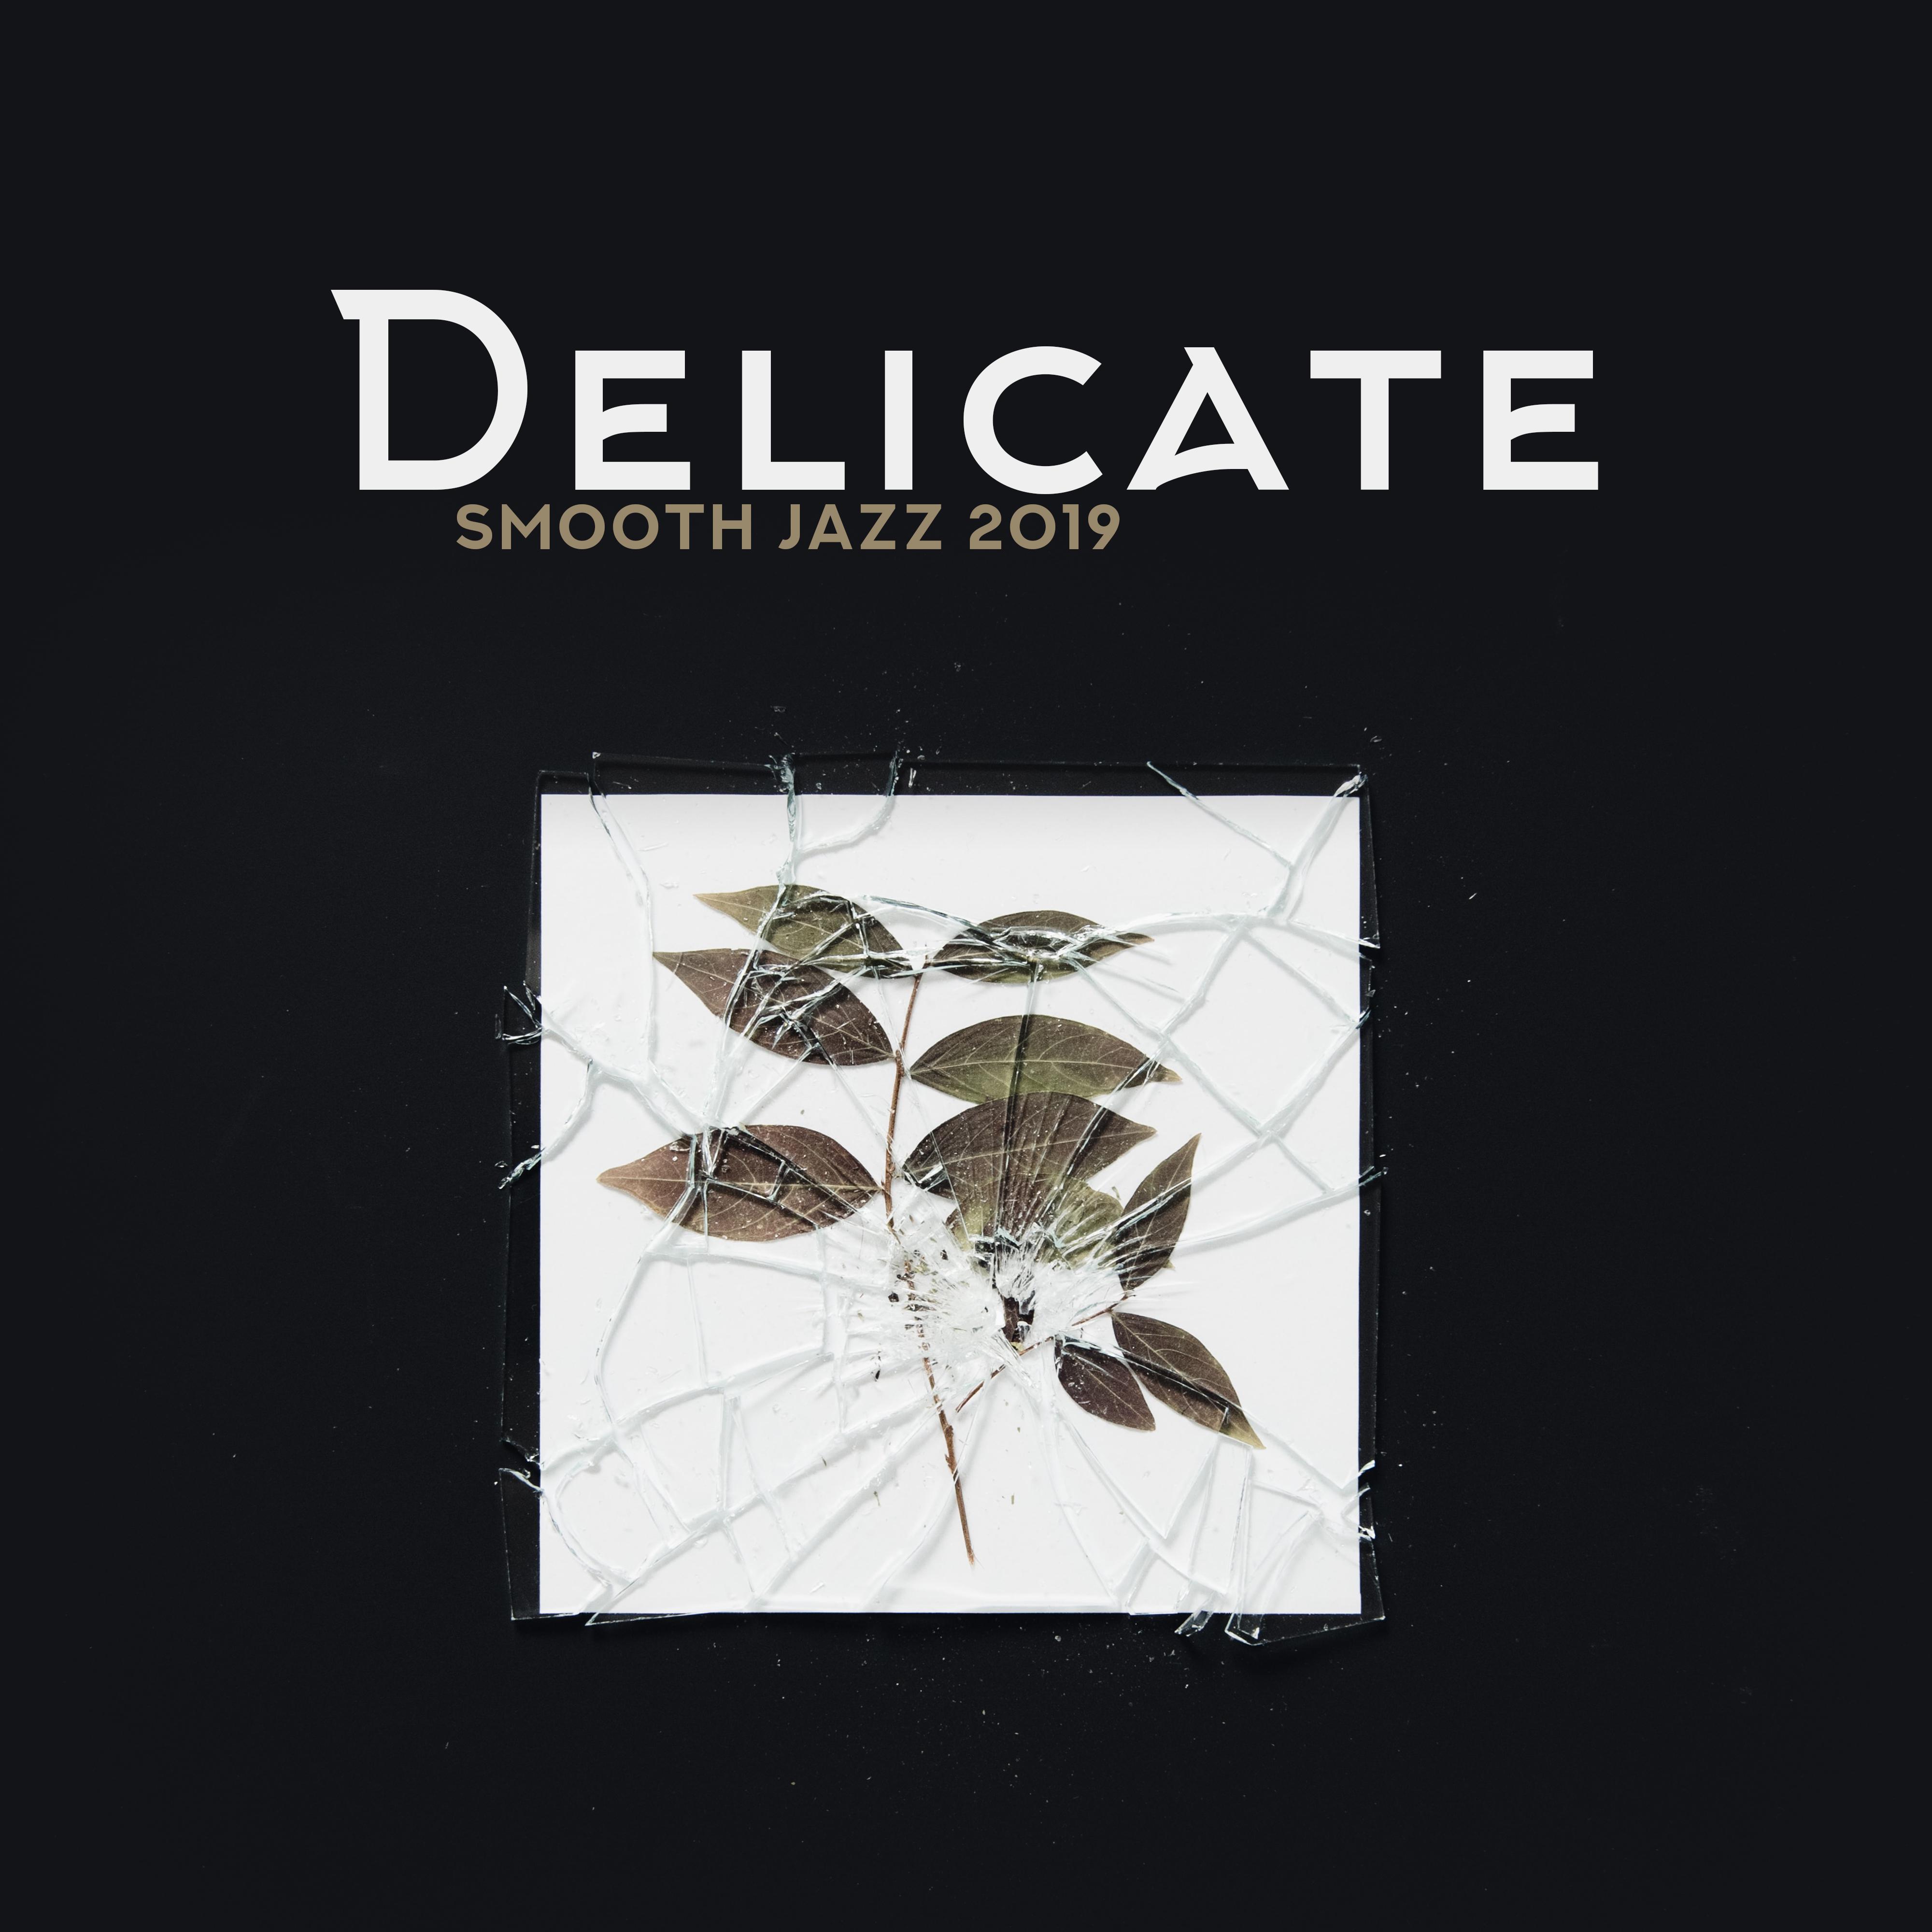 Delicate Smooth Jazz 2019: Calming Sounds, Peaceful Vibrations, Relaxing Jazz Music